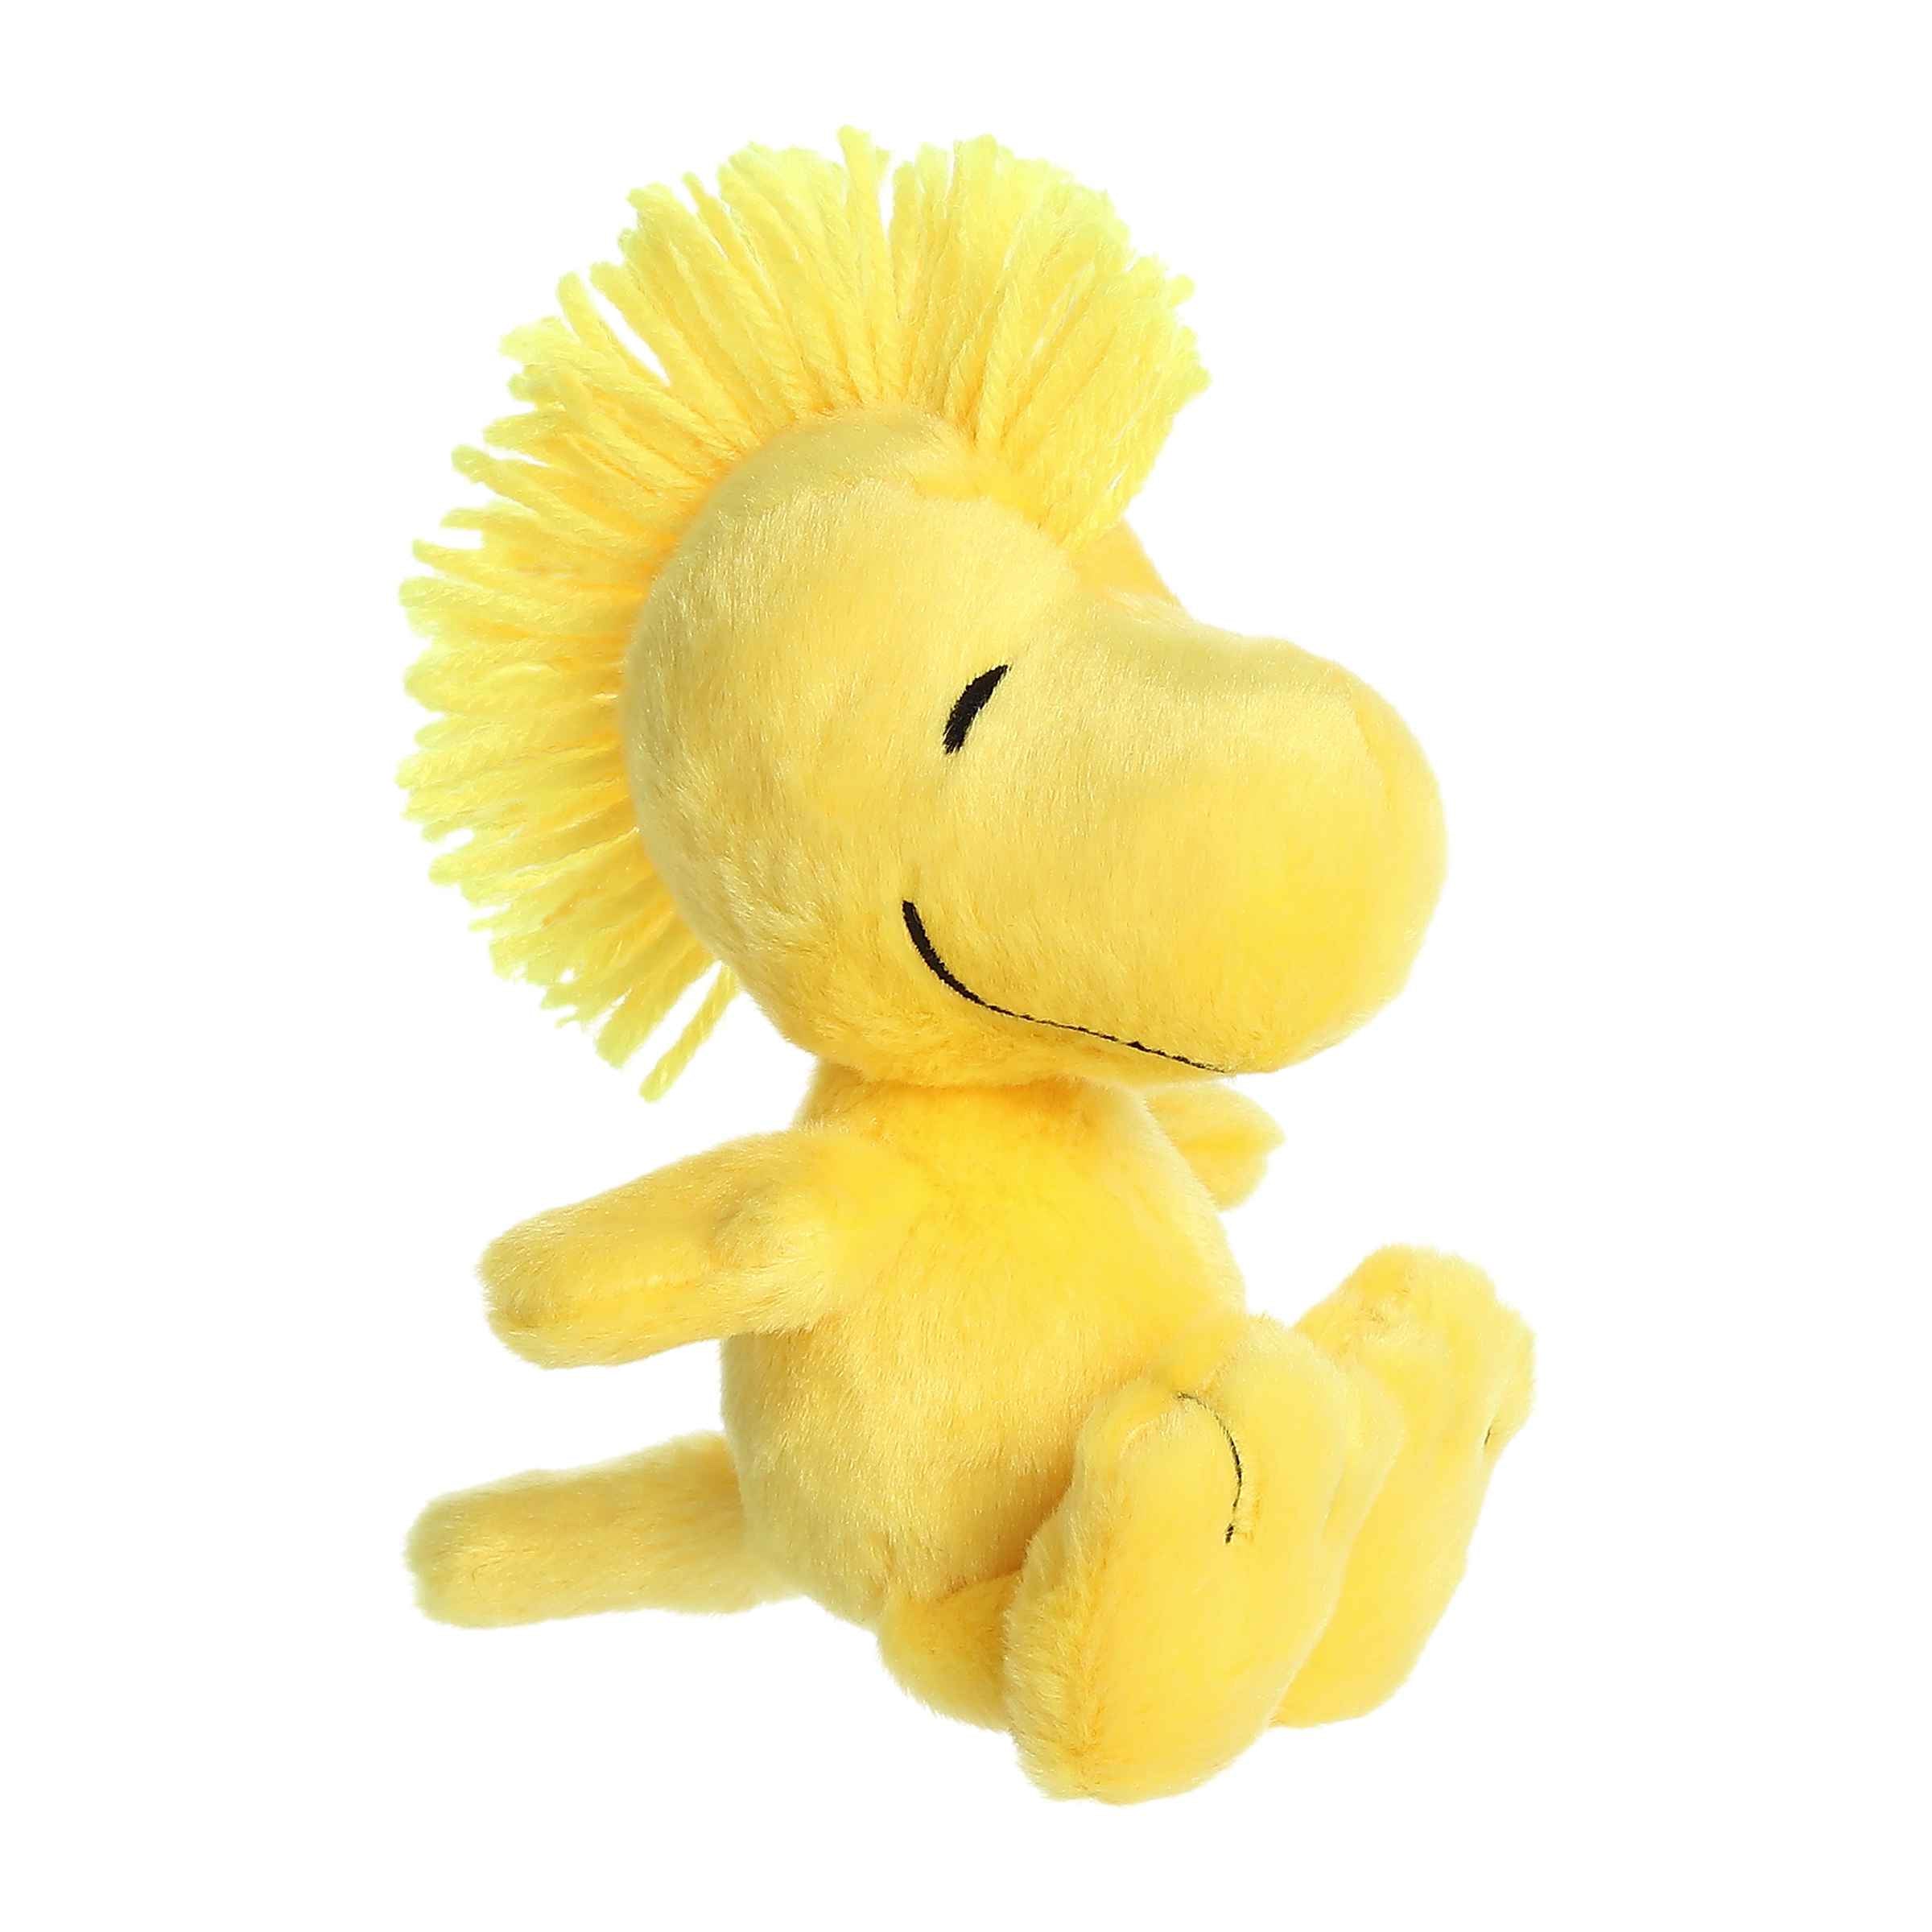 6.5-inch Woodstock plush from the Peanuts plush collection, soft yellow fabric and iconic hair resembling the famous bird